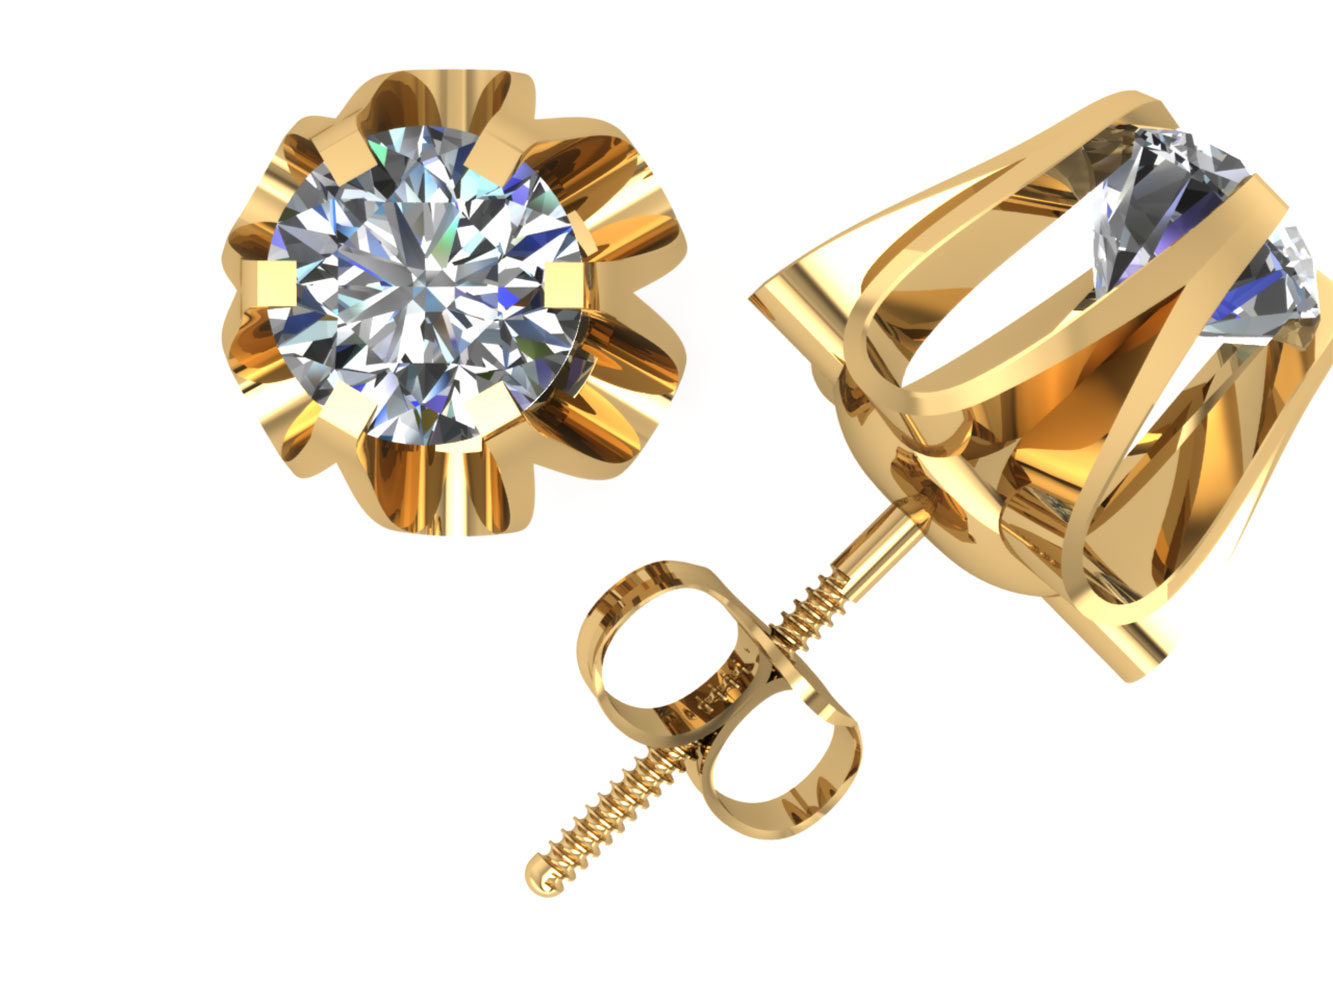 Jewel We Sell 1.00Ct Round Cut Diamond Buttercup Stud Earrings 14k White or Yellow Gold 6Prong Set K I2